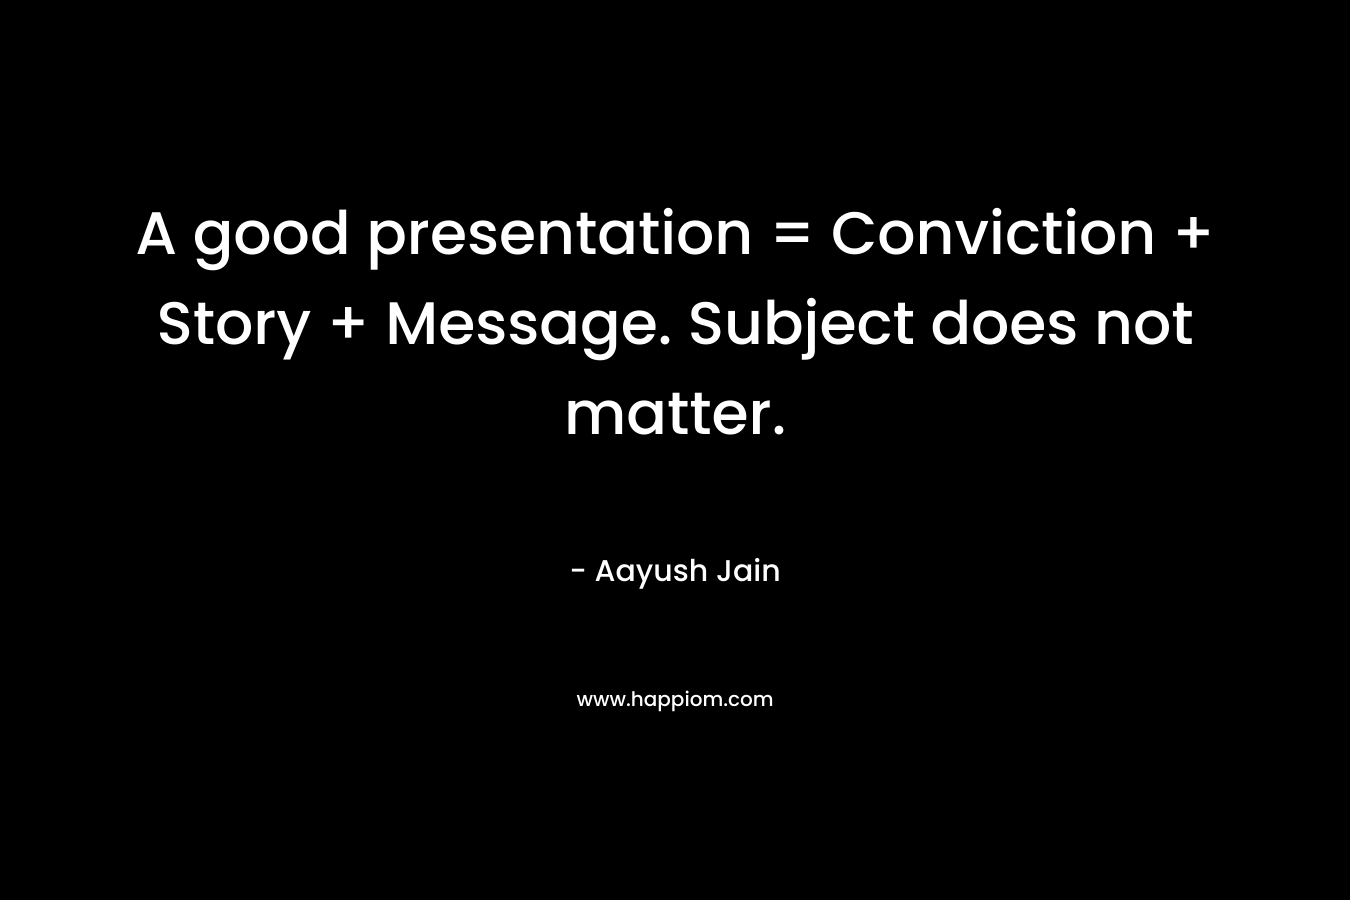 A good presentation = Conviction + Story + Message. Subject does not matter.